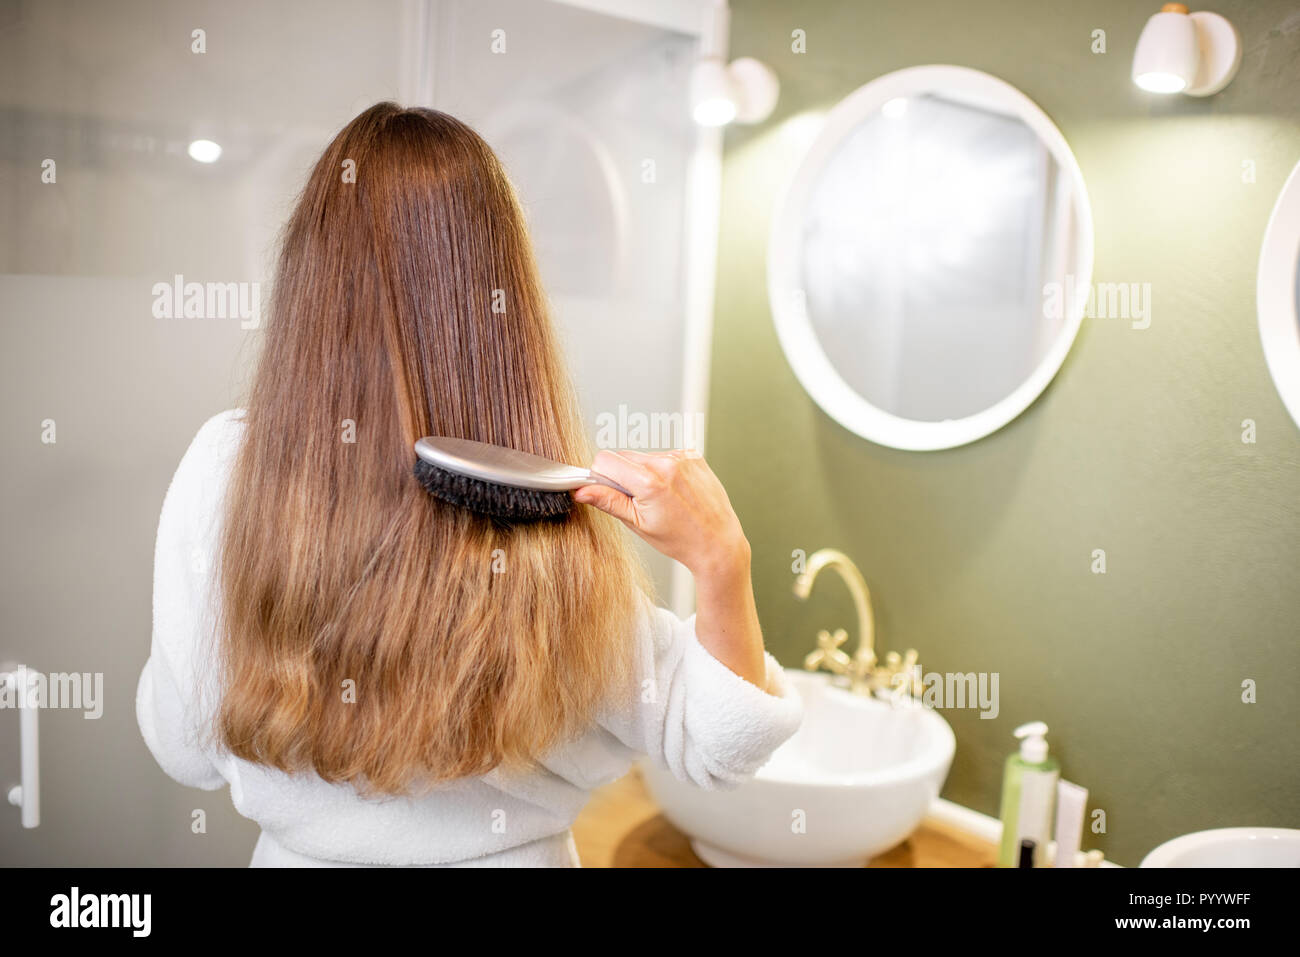 Woman in bathrobe combing hair with brush in the bathroom, rear view Stock Photo